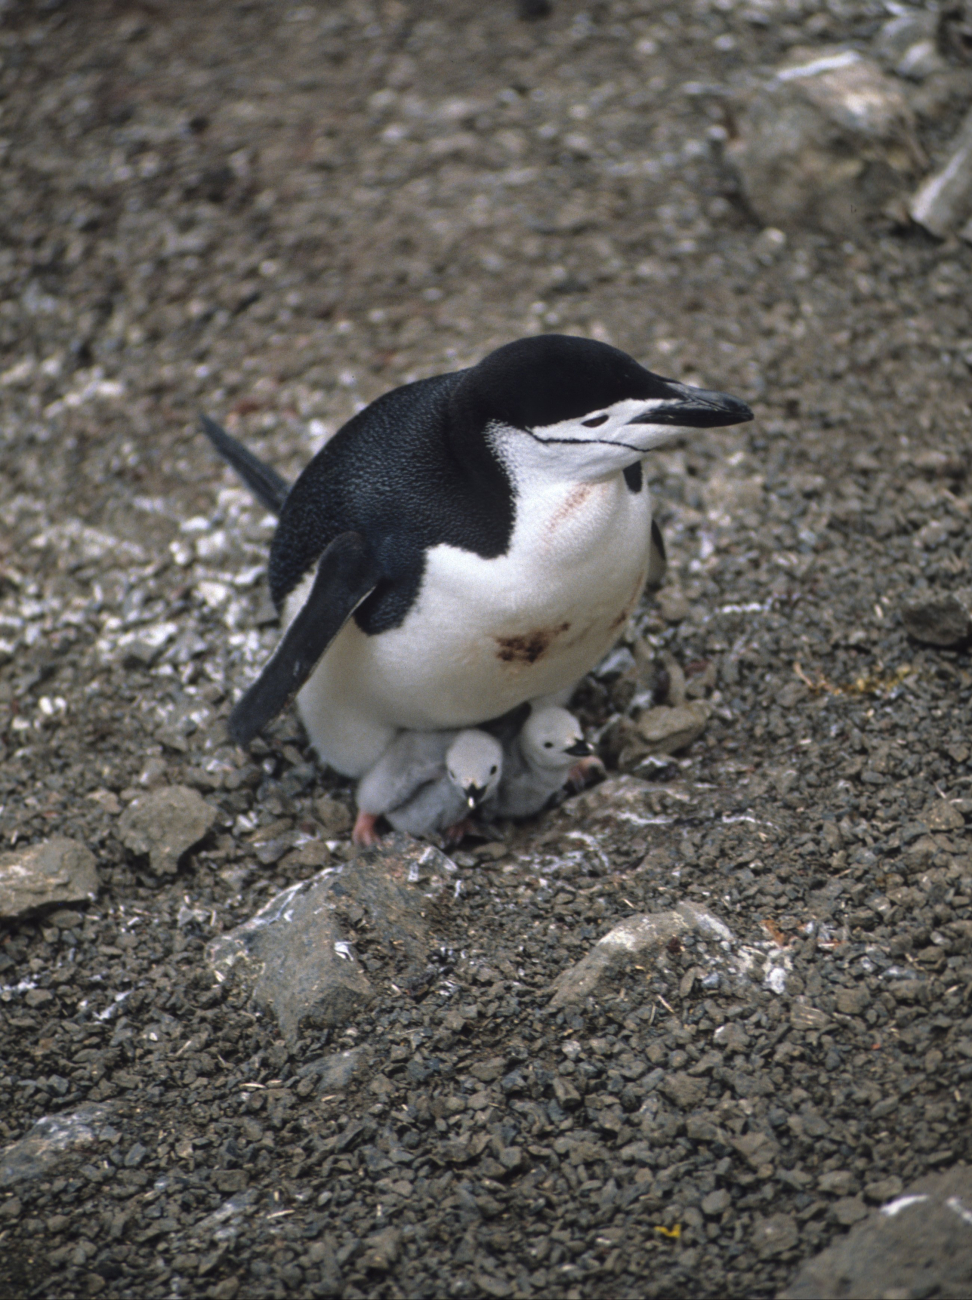 An adult chinstrap penguin with two chicks